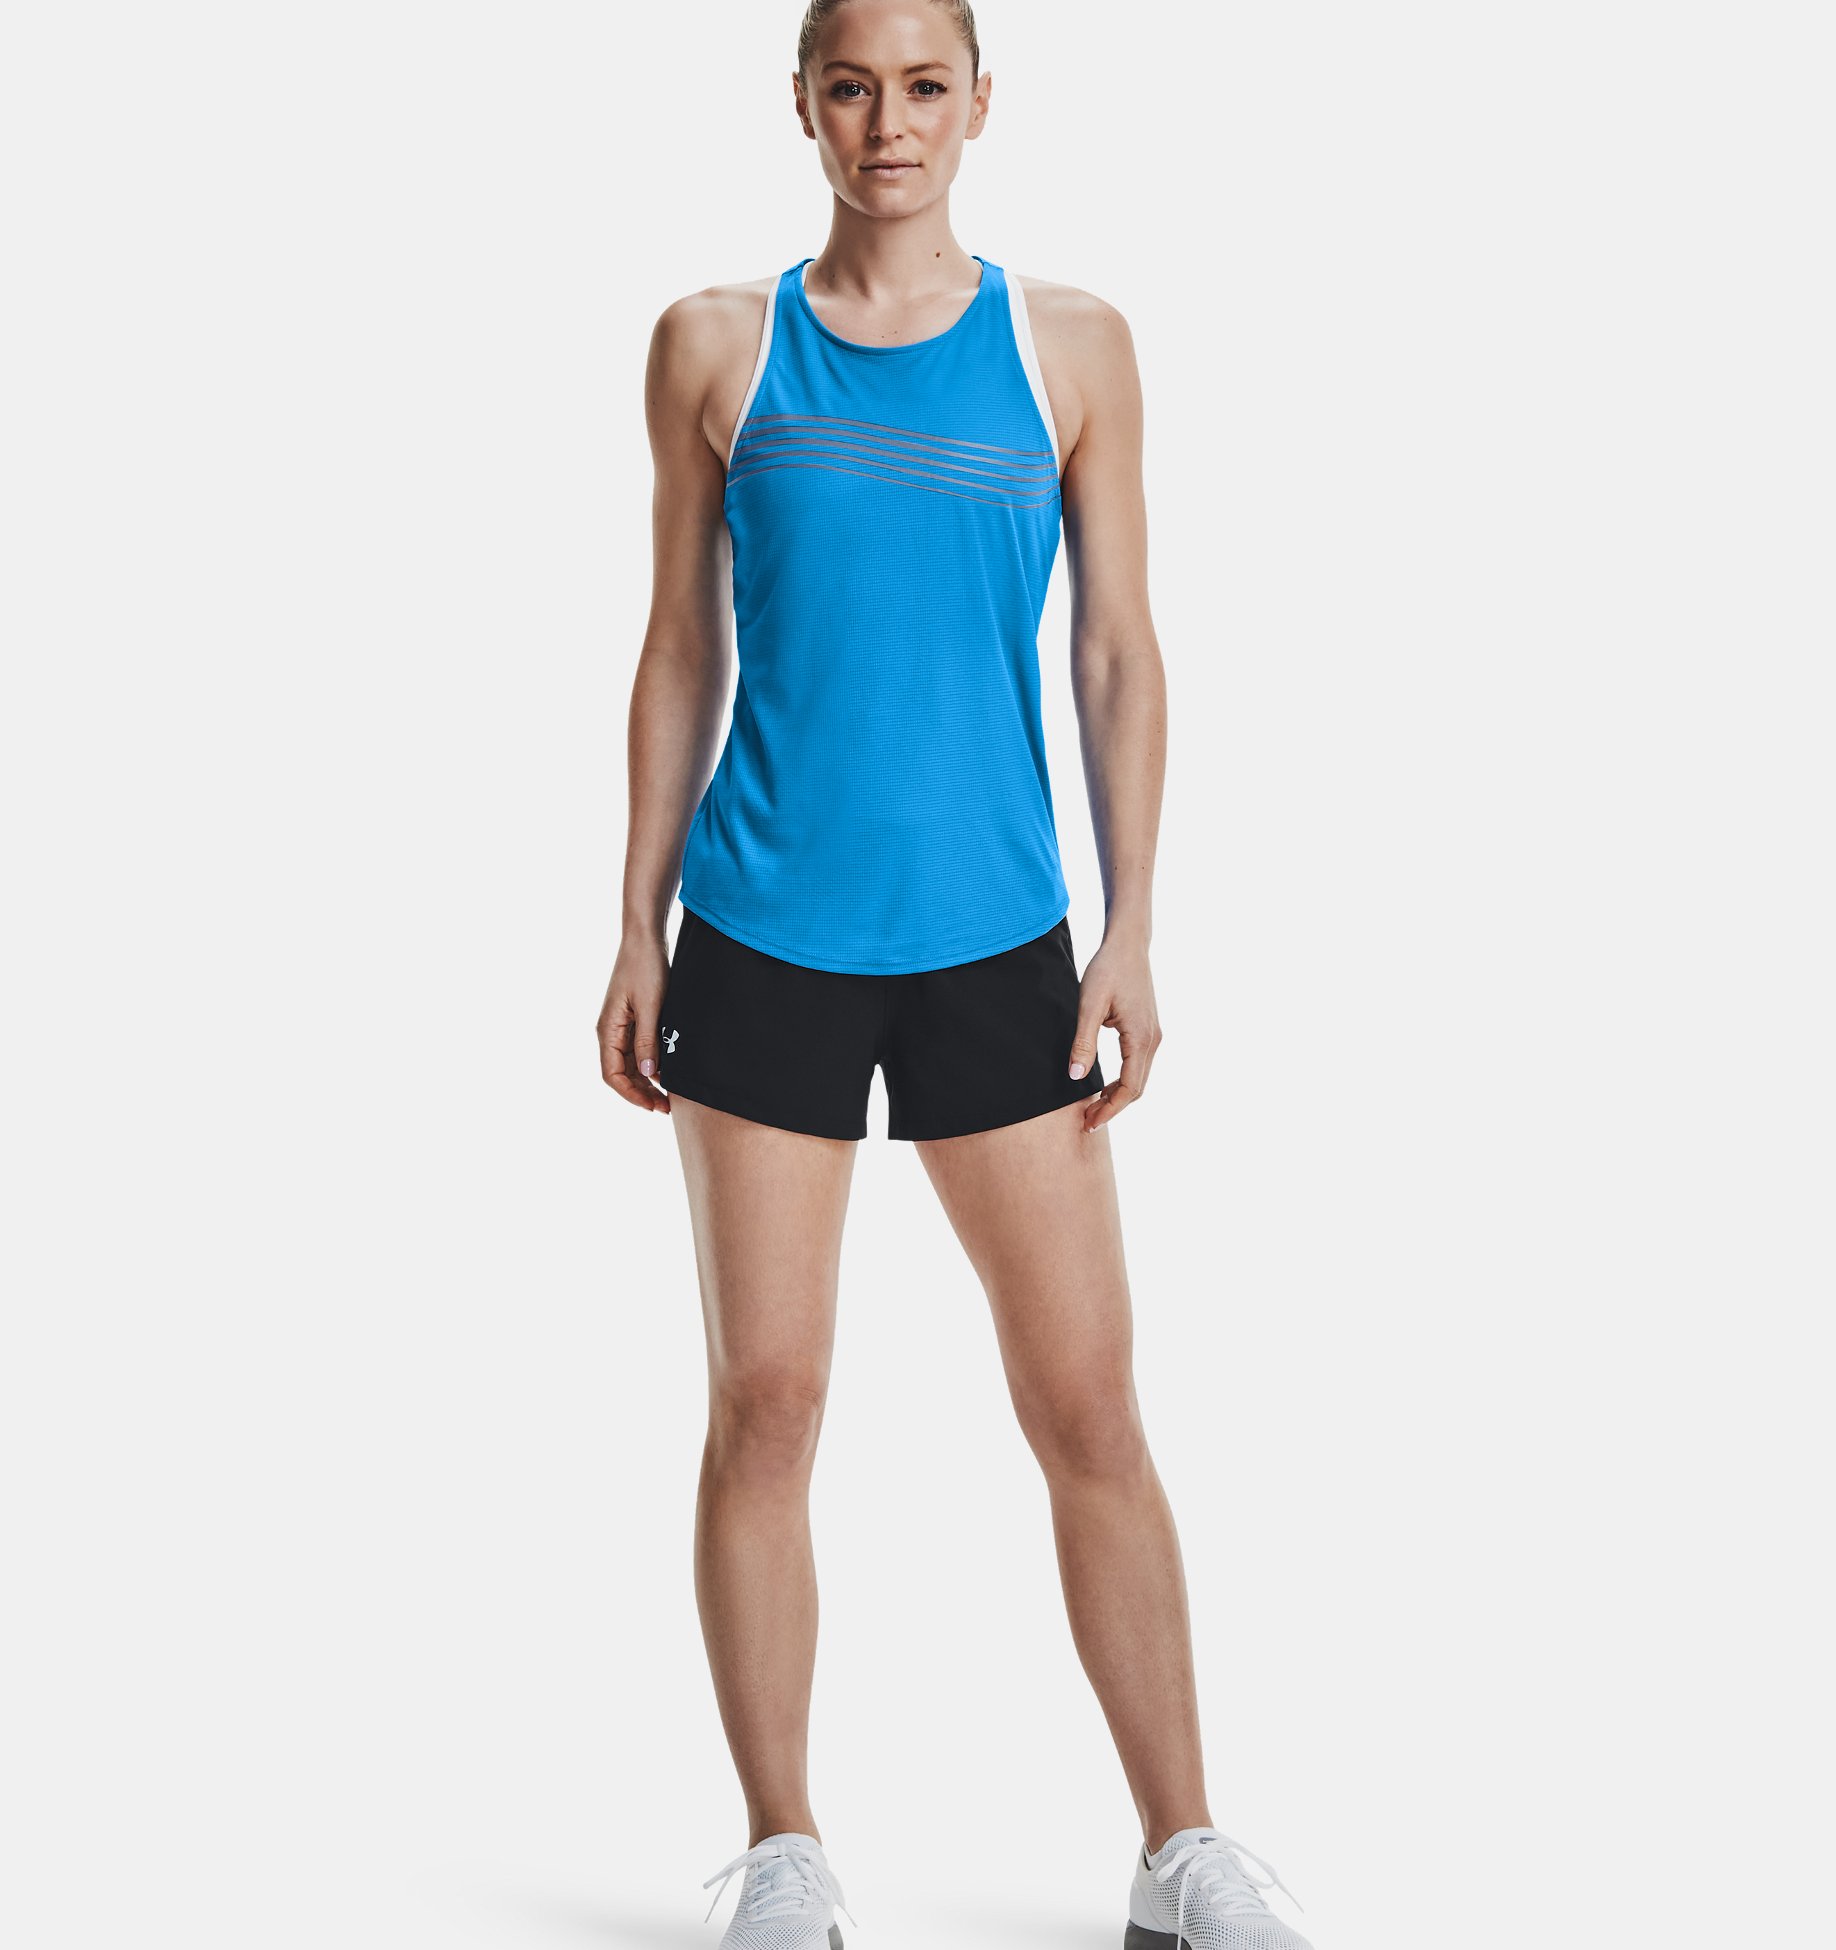 Under Armour Launch Stretch Woven Go all Day Short Pantaloncini Donna